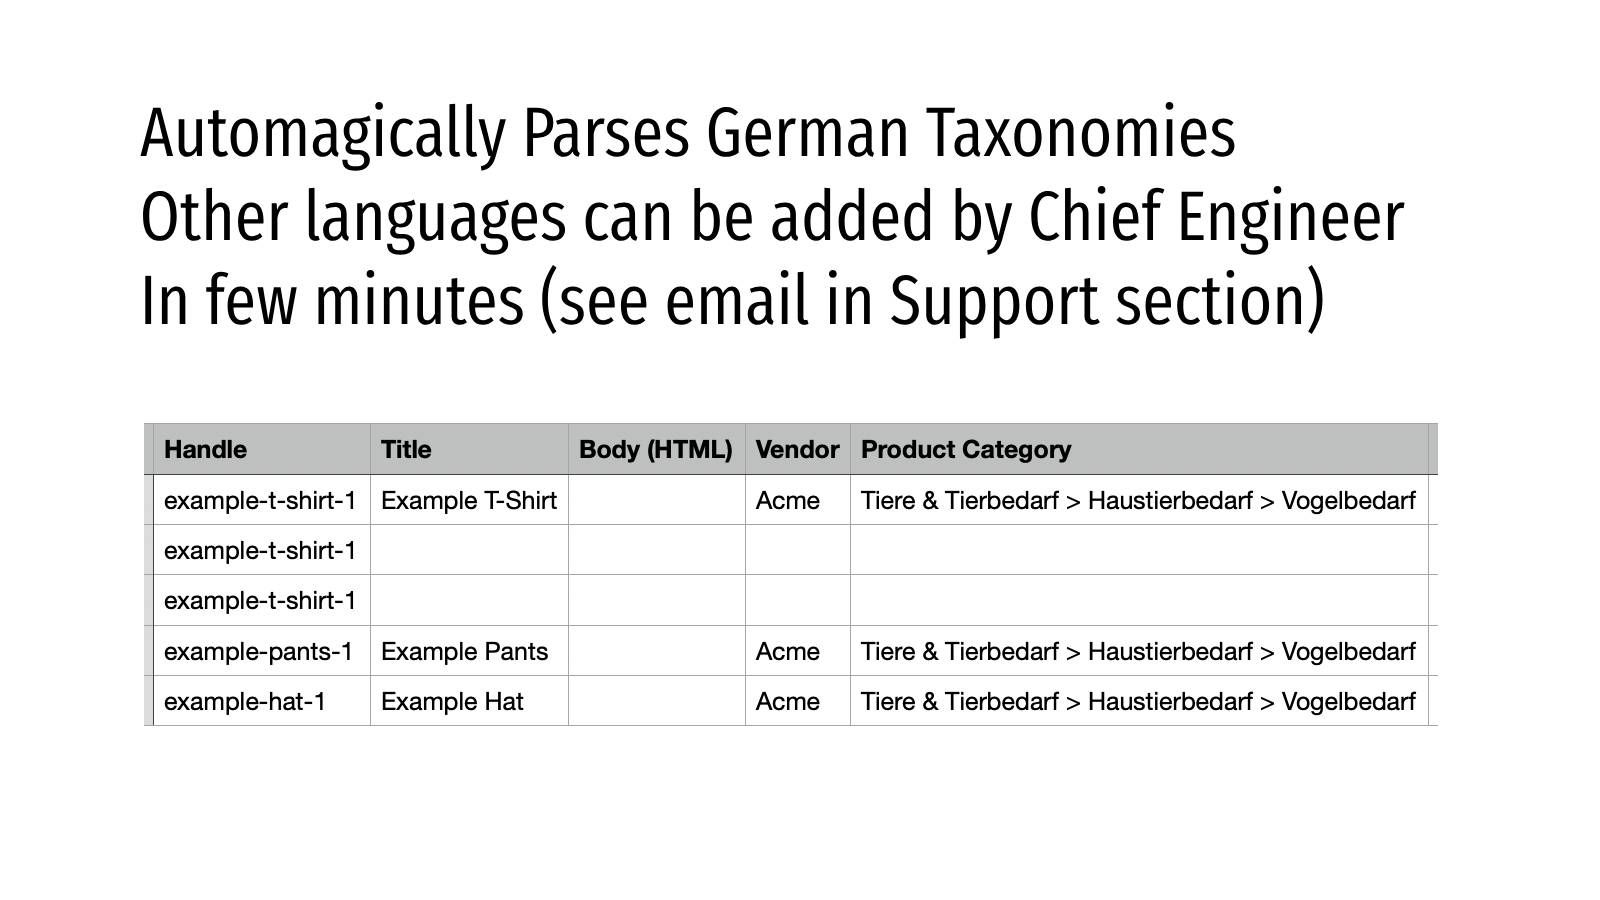 Automagically Parses German Taxonomies, & can add new languages.